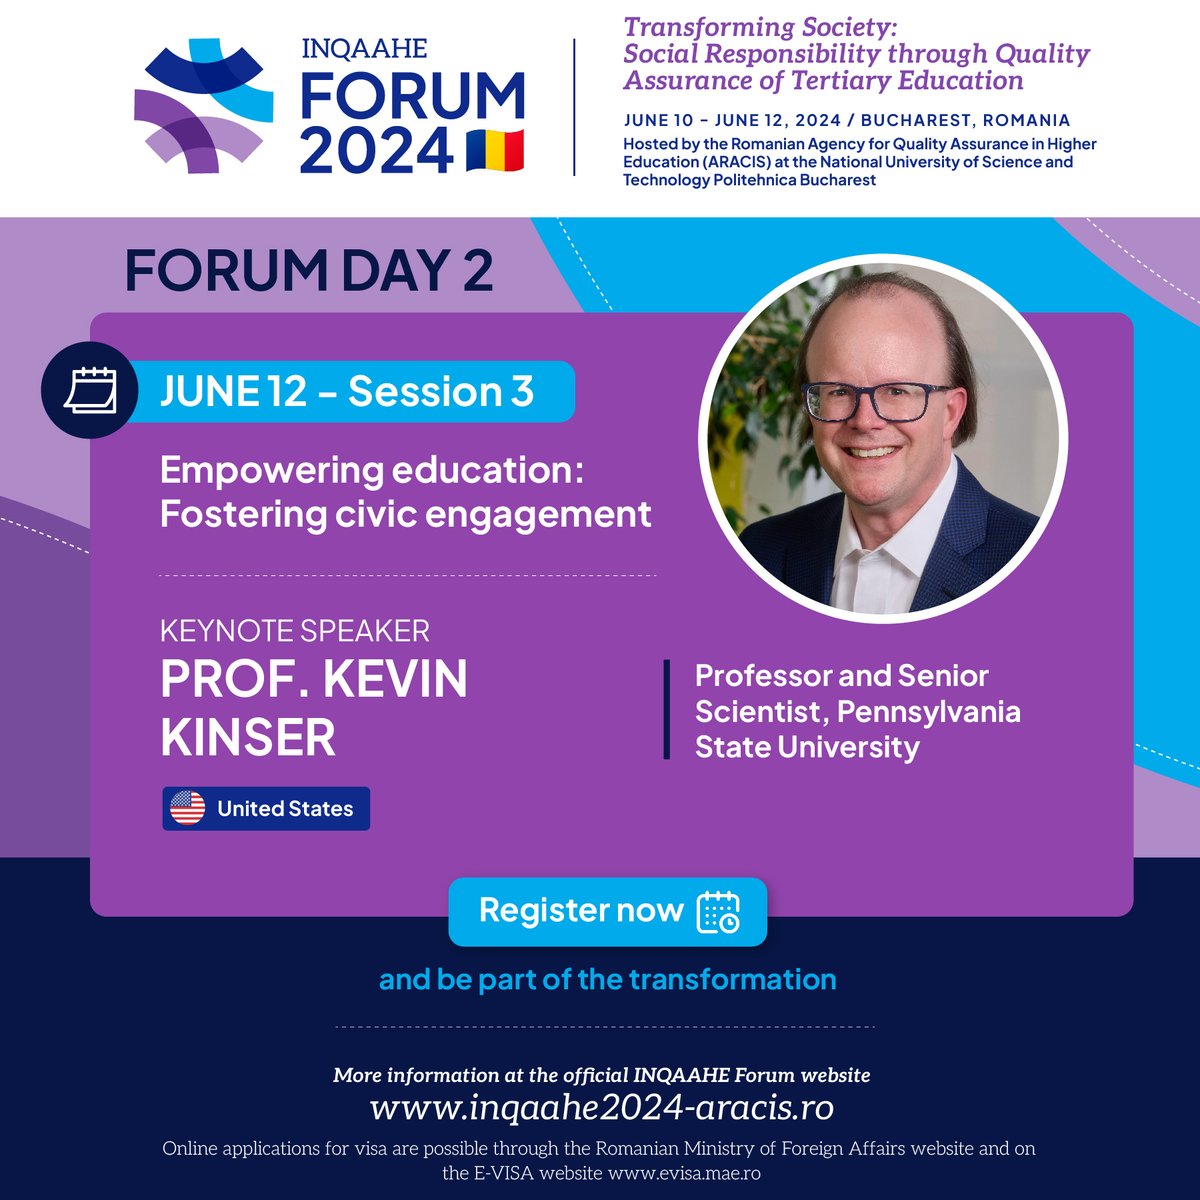 #INQAAHEForum2024 Day 2, Session 3: We are pleased to welcome Prof. Kevin Kinser, who will deliver a keynote session on 'Civic engagement as a public good: The role of quality assurance in nurturing active citizenship.' Further details 👉 inqaahe.org/blog/forum-202…